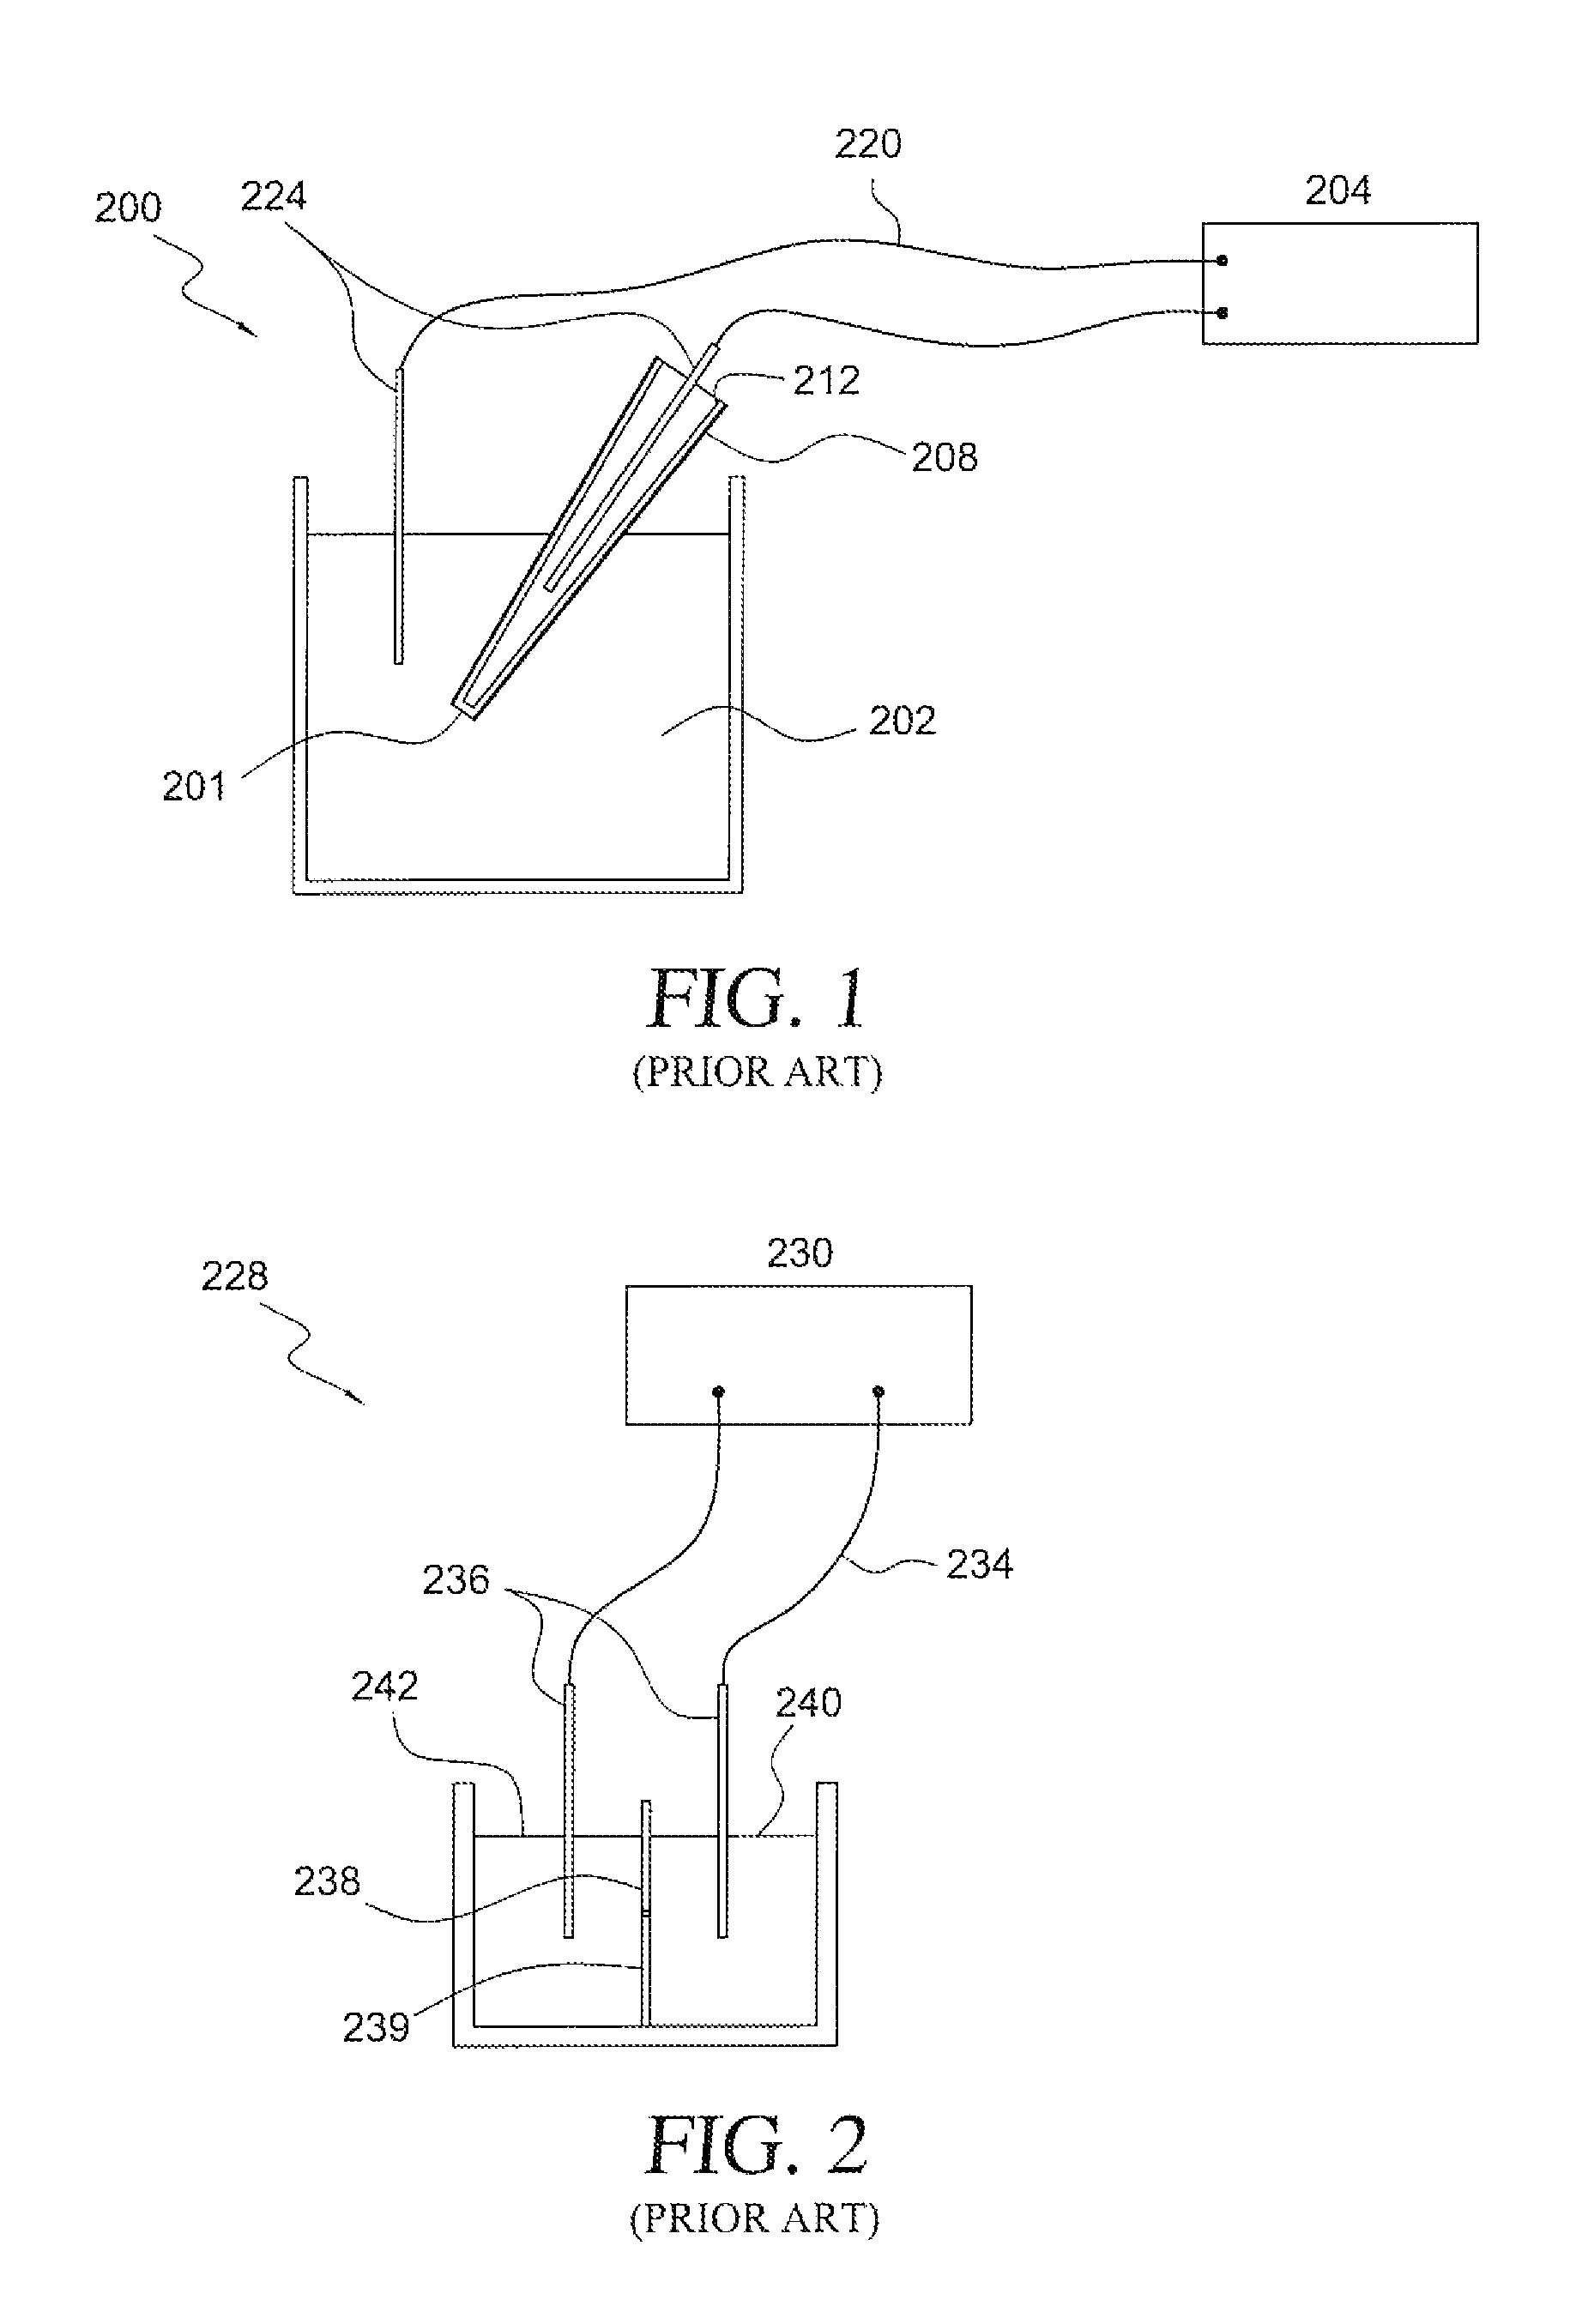 Apparatus and method for sensing a time varying ionic current in an electrolytic system